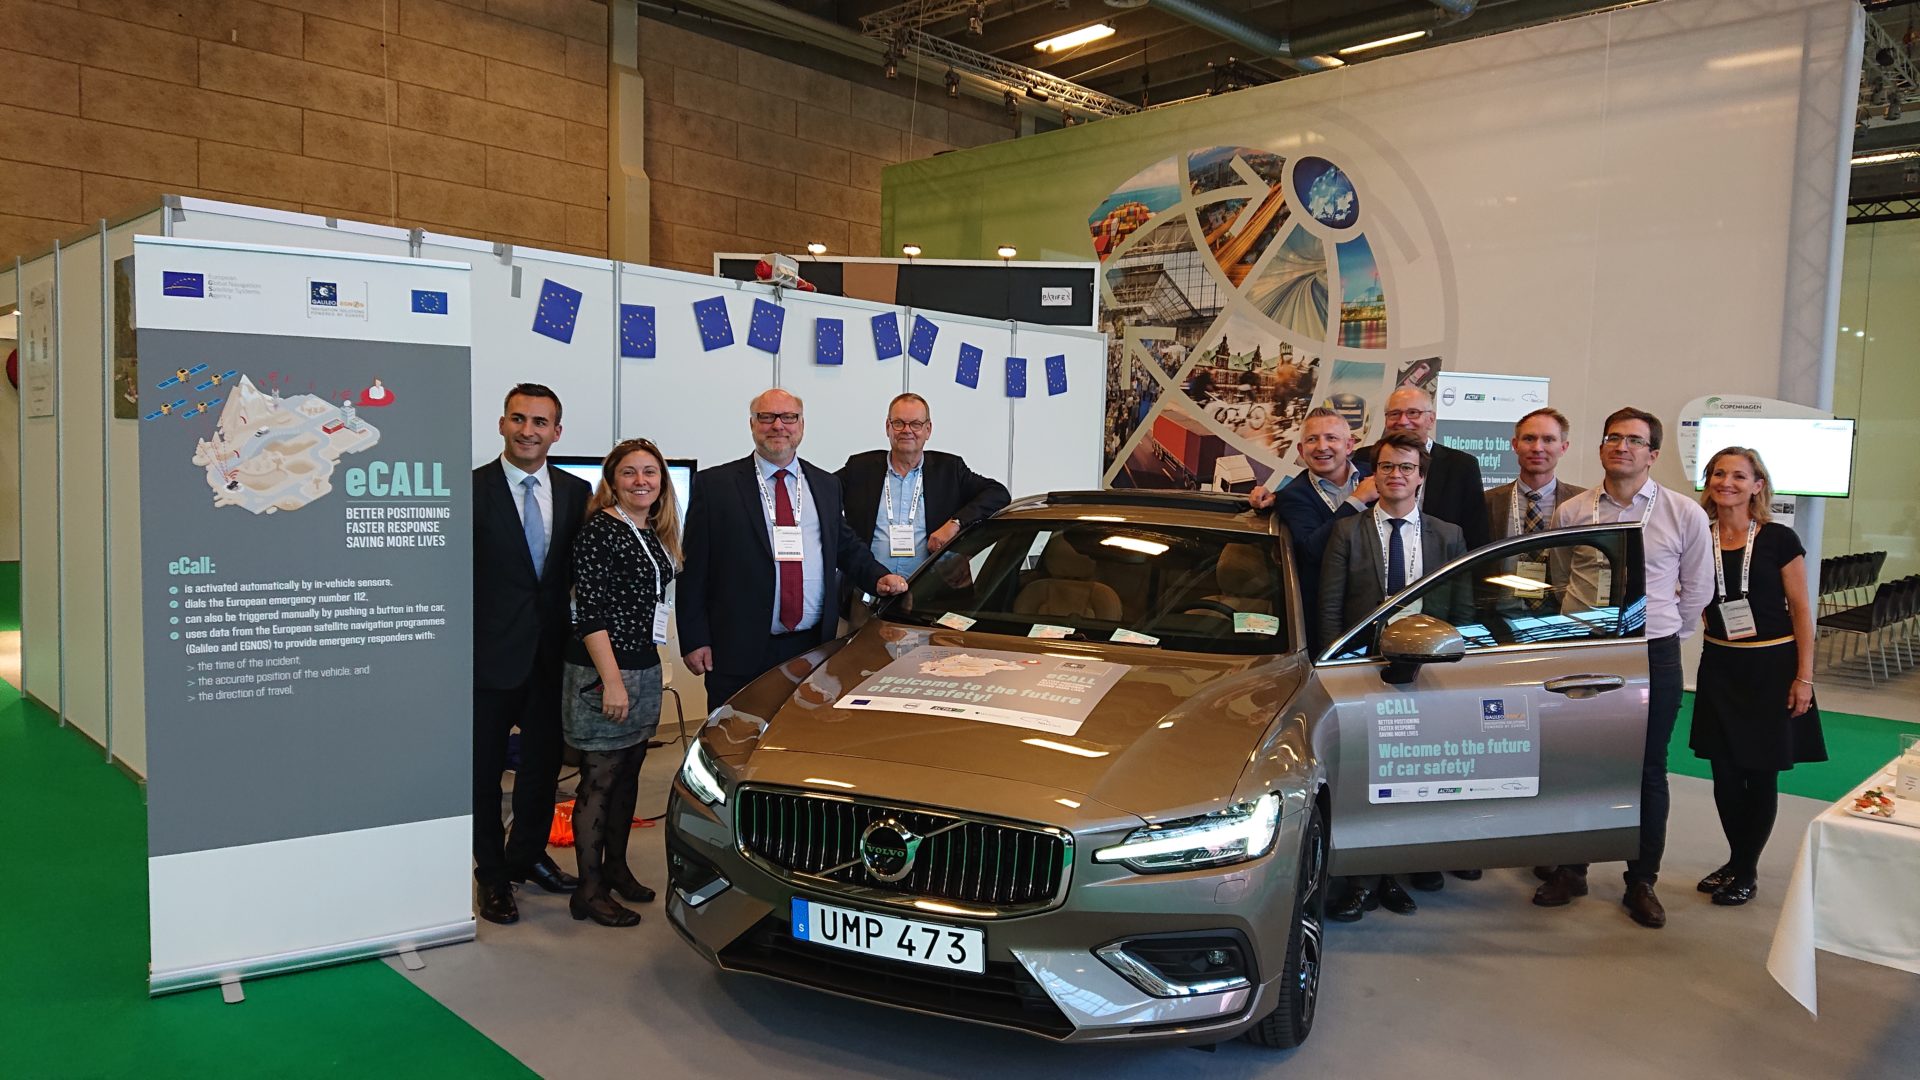 GNSS.asia presents first eCall-enabled car with Volvo & industry